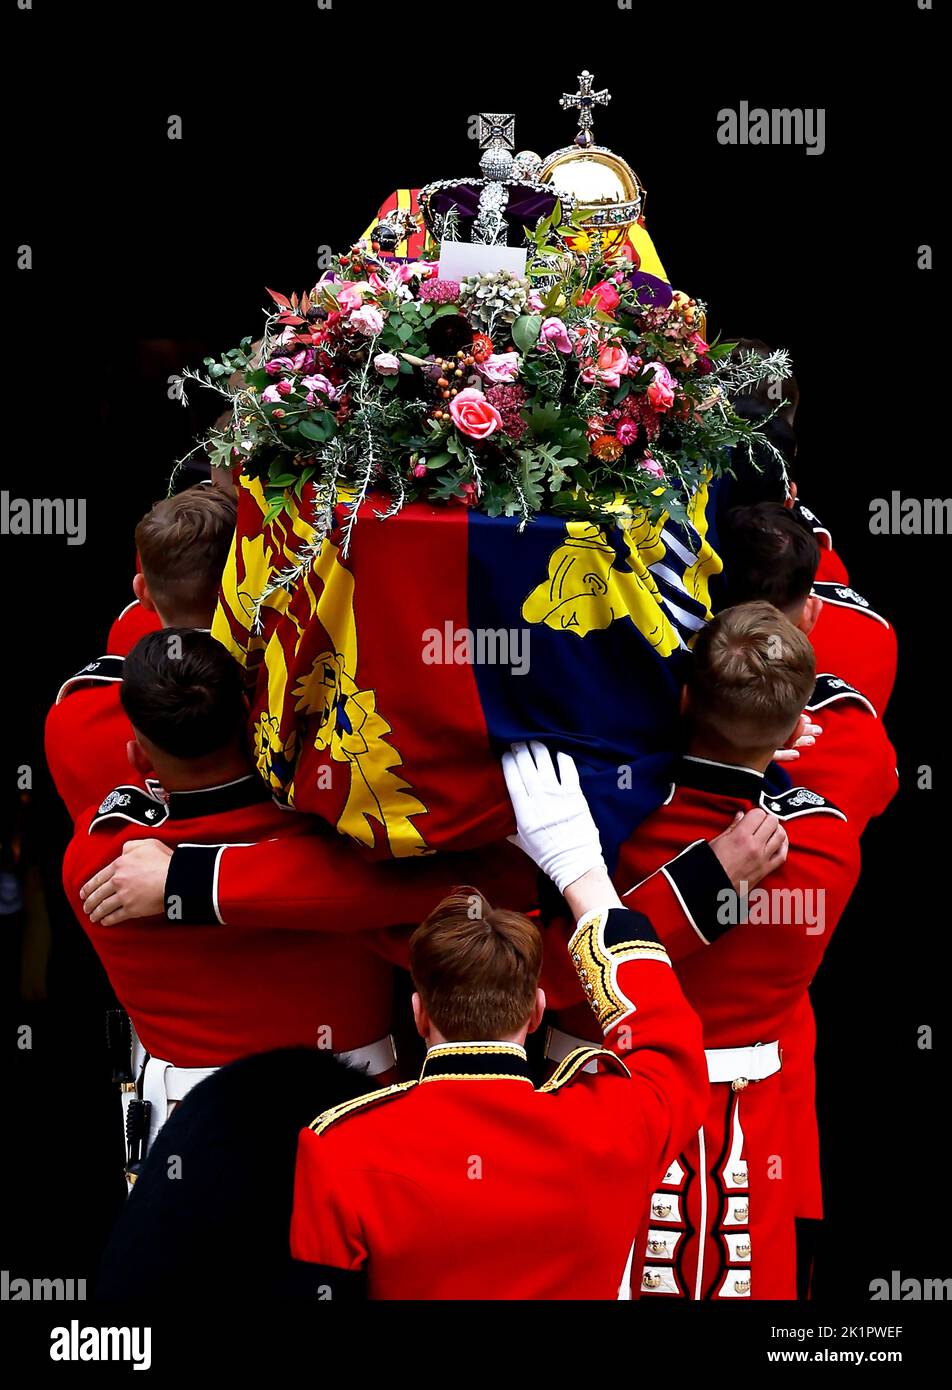 The bearer party from the Queen's Company, 1st Battalion Grenadier Guards carry the coffin of Queen Elizabeth II in to St George's Chapel at Windsor Castle for the Committal Service following the state funeral at Westminster Abbey. Picture date: Monday September 19, 2022. Stock Photo